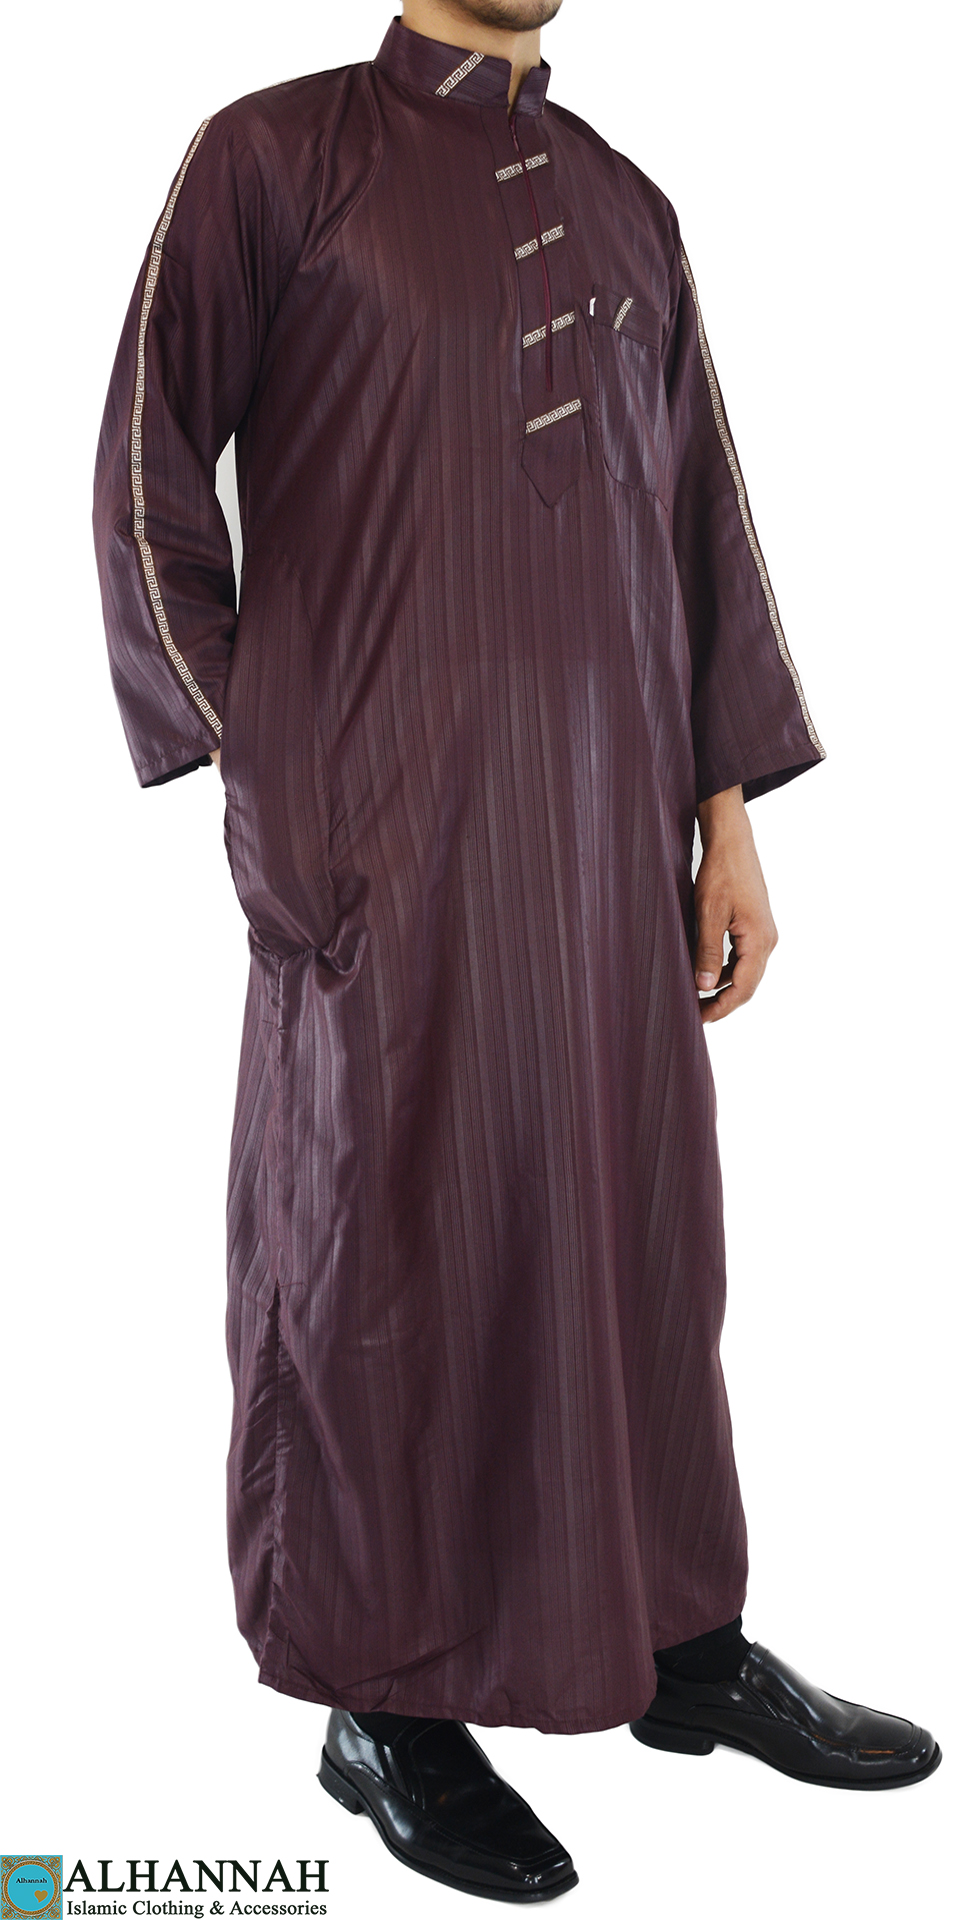 Amani Mens Thobe with Zipper up front and unique Embroidery me706